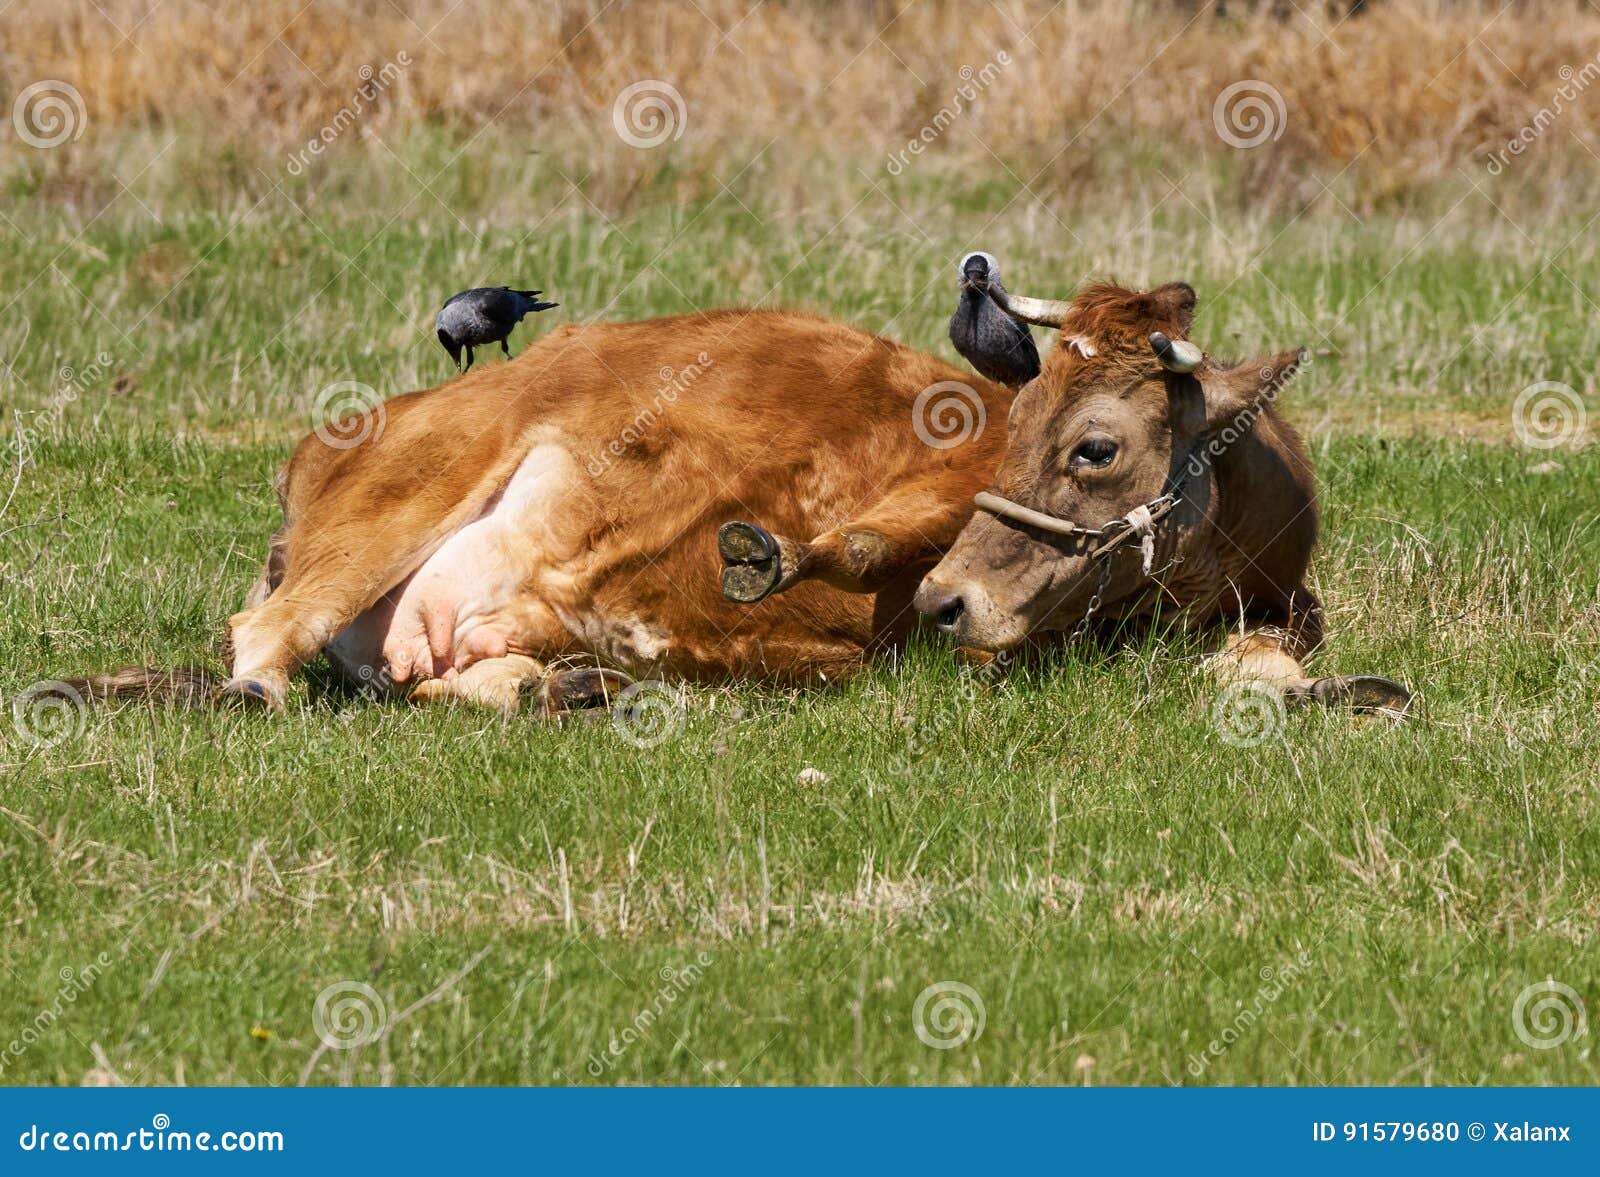 cow getting pecked by birds